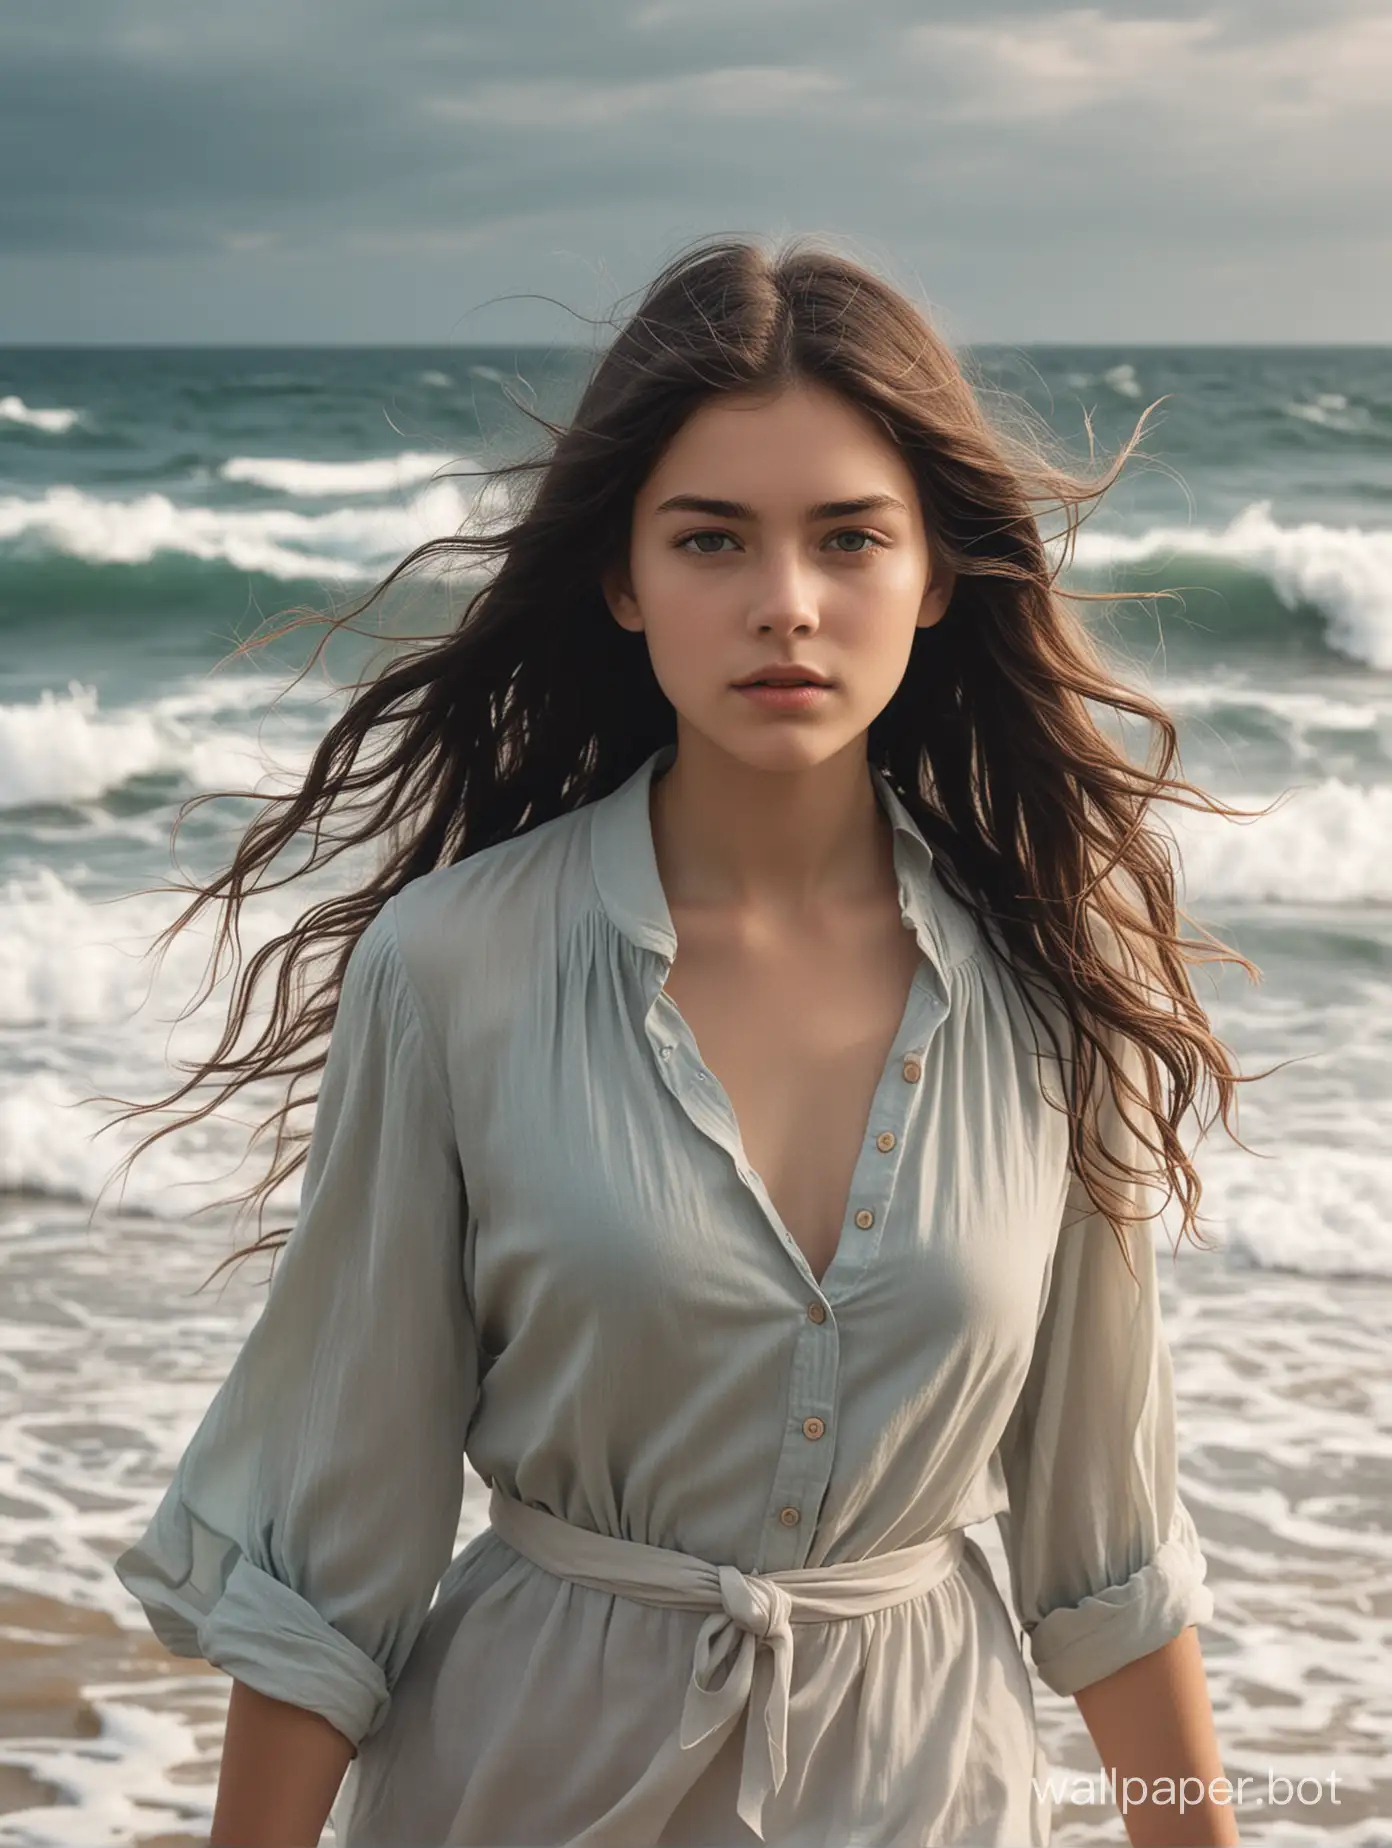 The cover of the book "Swallow" depicts a 19-year-old girl with long dark hair. She's standing on the edge of the ocean, the waves crashing on the shore and the wind blowing through her hair. Her eyes are full of determination and strength, but at the same time they reflect tenderness and vulnerability. The girl is dressed in simple but stylish clothes, which emphasizes her independence and courage. The background of the cover can be in soft pastel colors to create an atmosphere of tenderness and mystery.